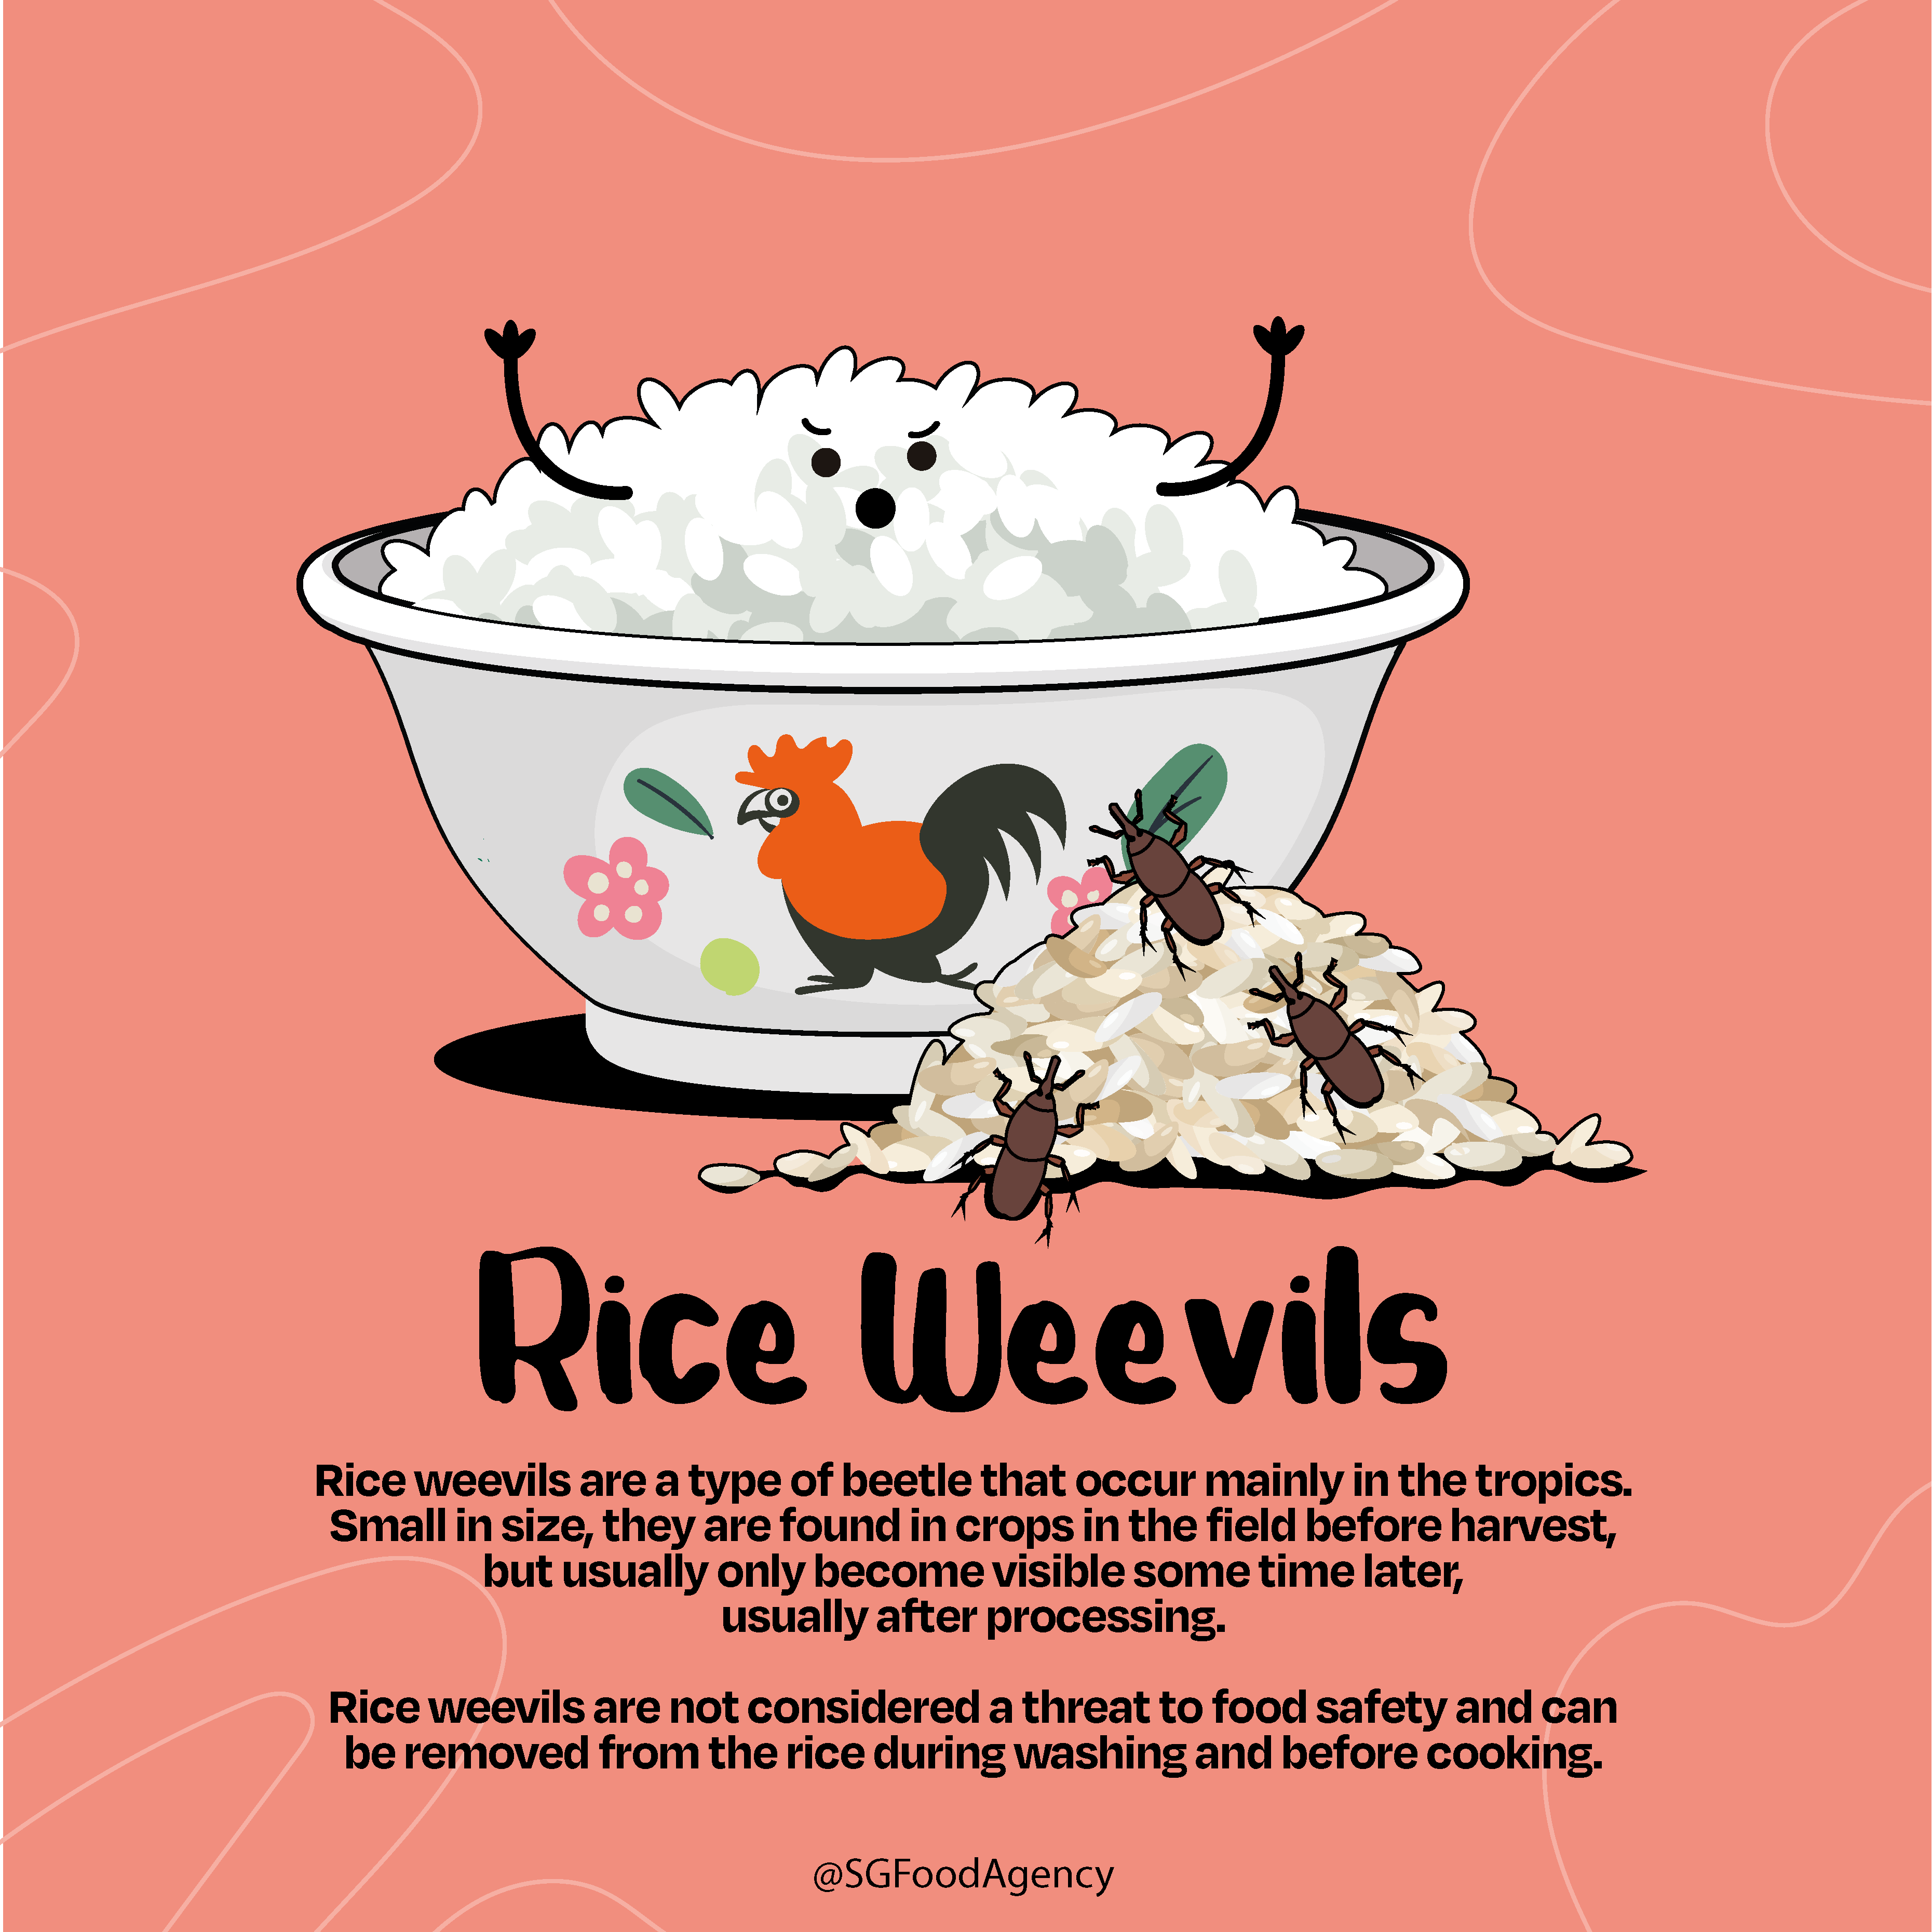 What are rice weevils